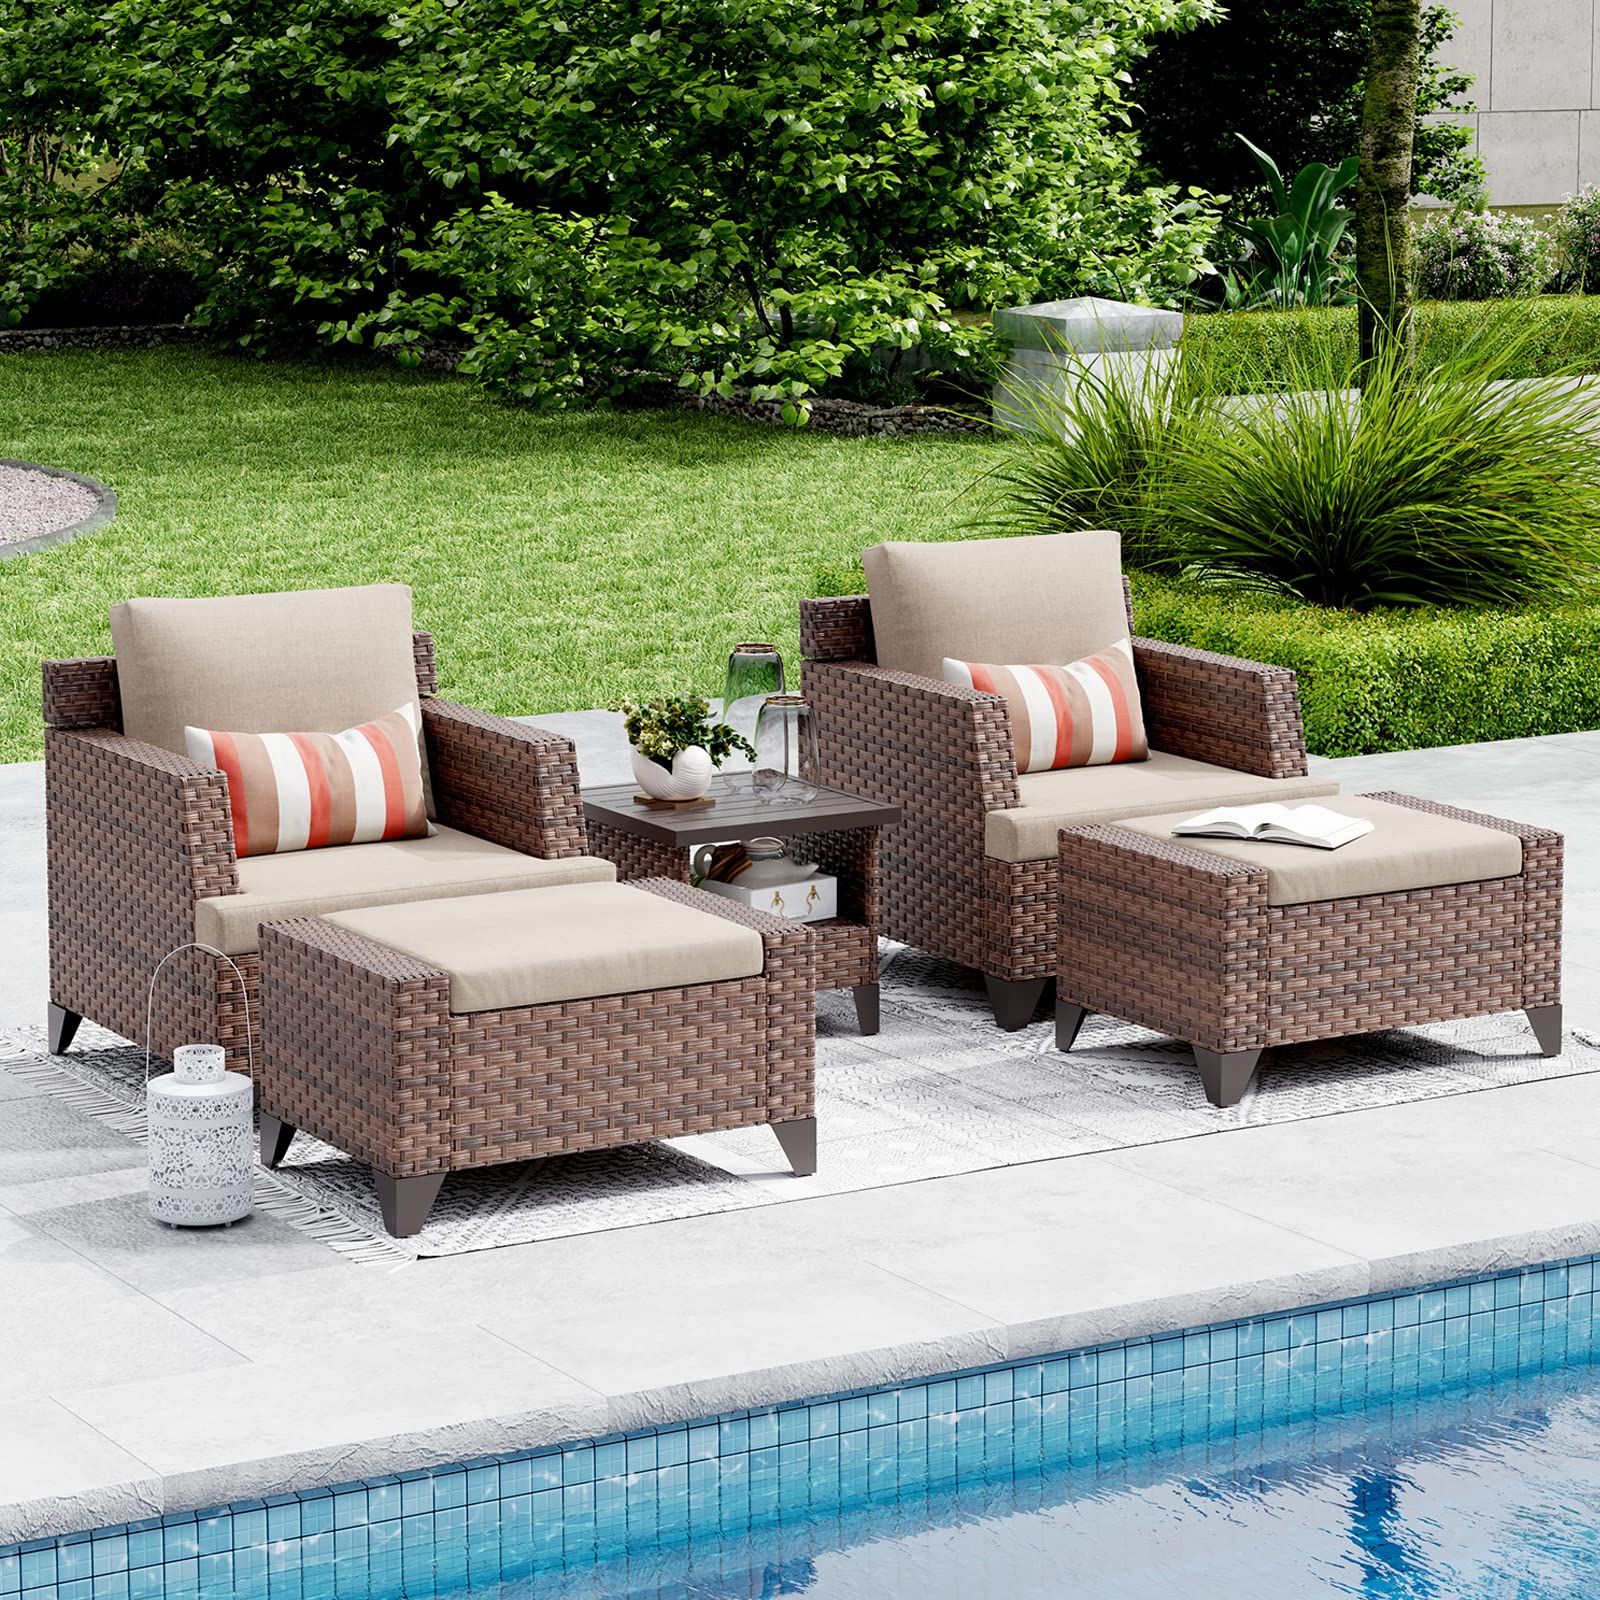 Amazon: Sunsitt 5 Piece Outdoor Patio Furniture Set, Rattan Patio  Lounge Chair And Ottoman Set With Waterproof Sofa Covers, Side Table With  Aluminum Slatted Top, Brown Wicker : Patio, Lawn & Garden With Newest 5 Piece Outdoor Patio Furniture Set (Photo 1 of 15)